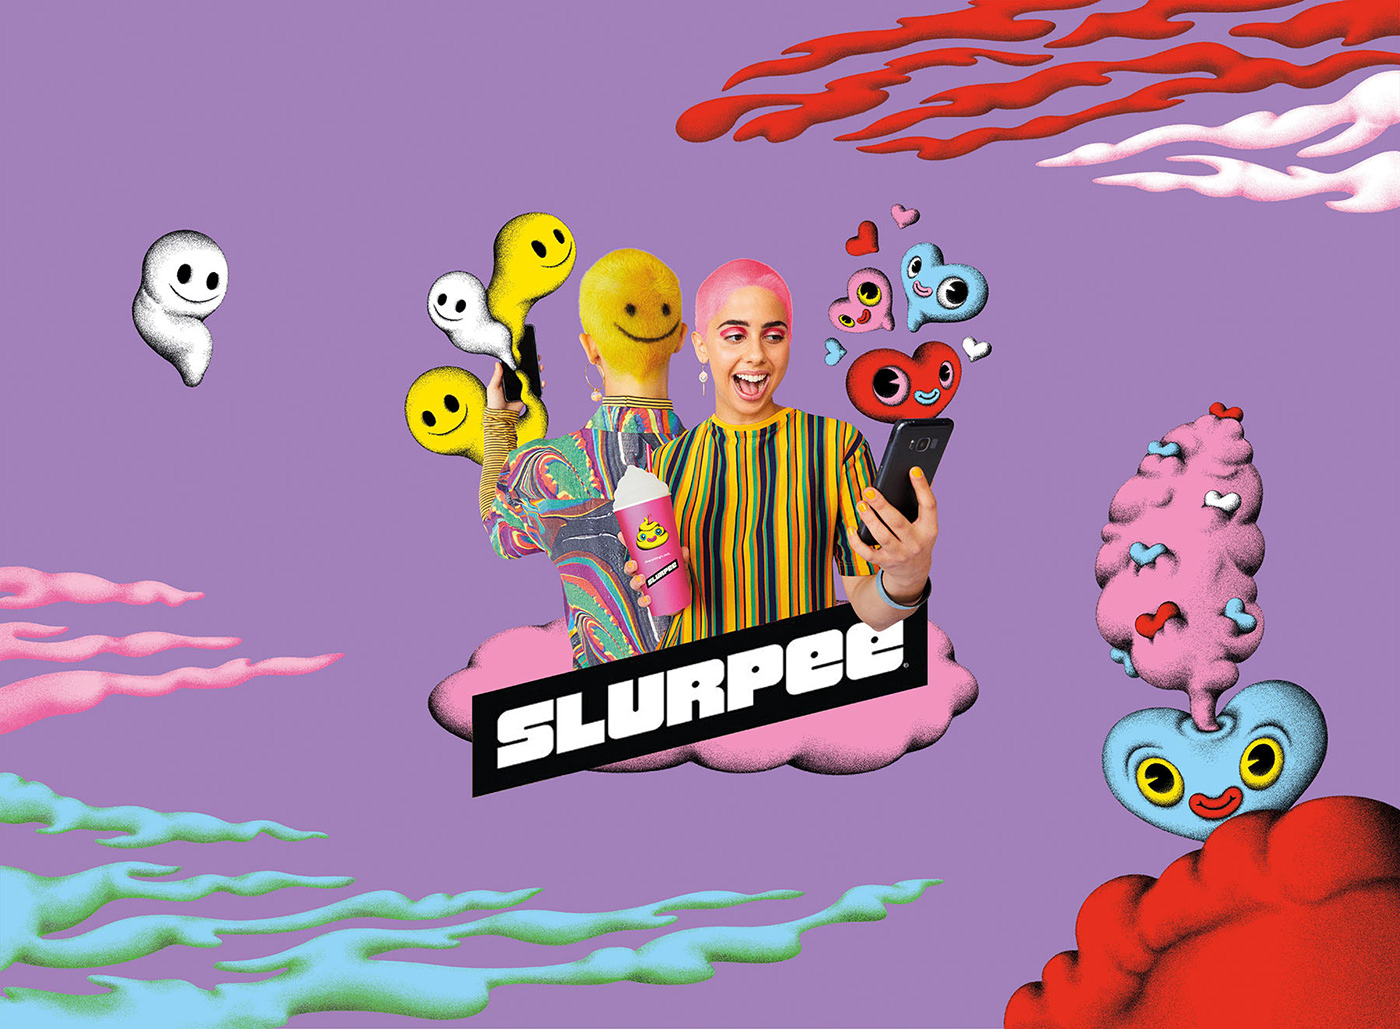 Artwork for Slurpee, applied to translites in 7-Eleven stores in the United States.